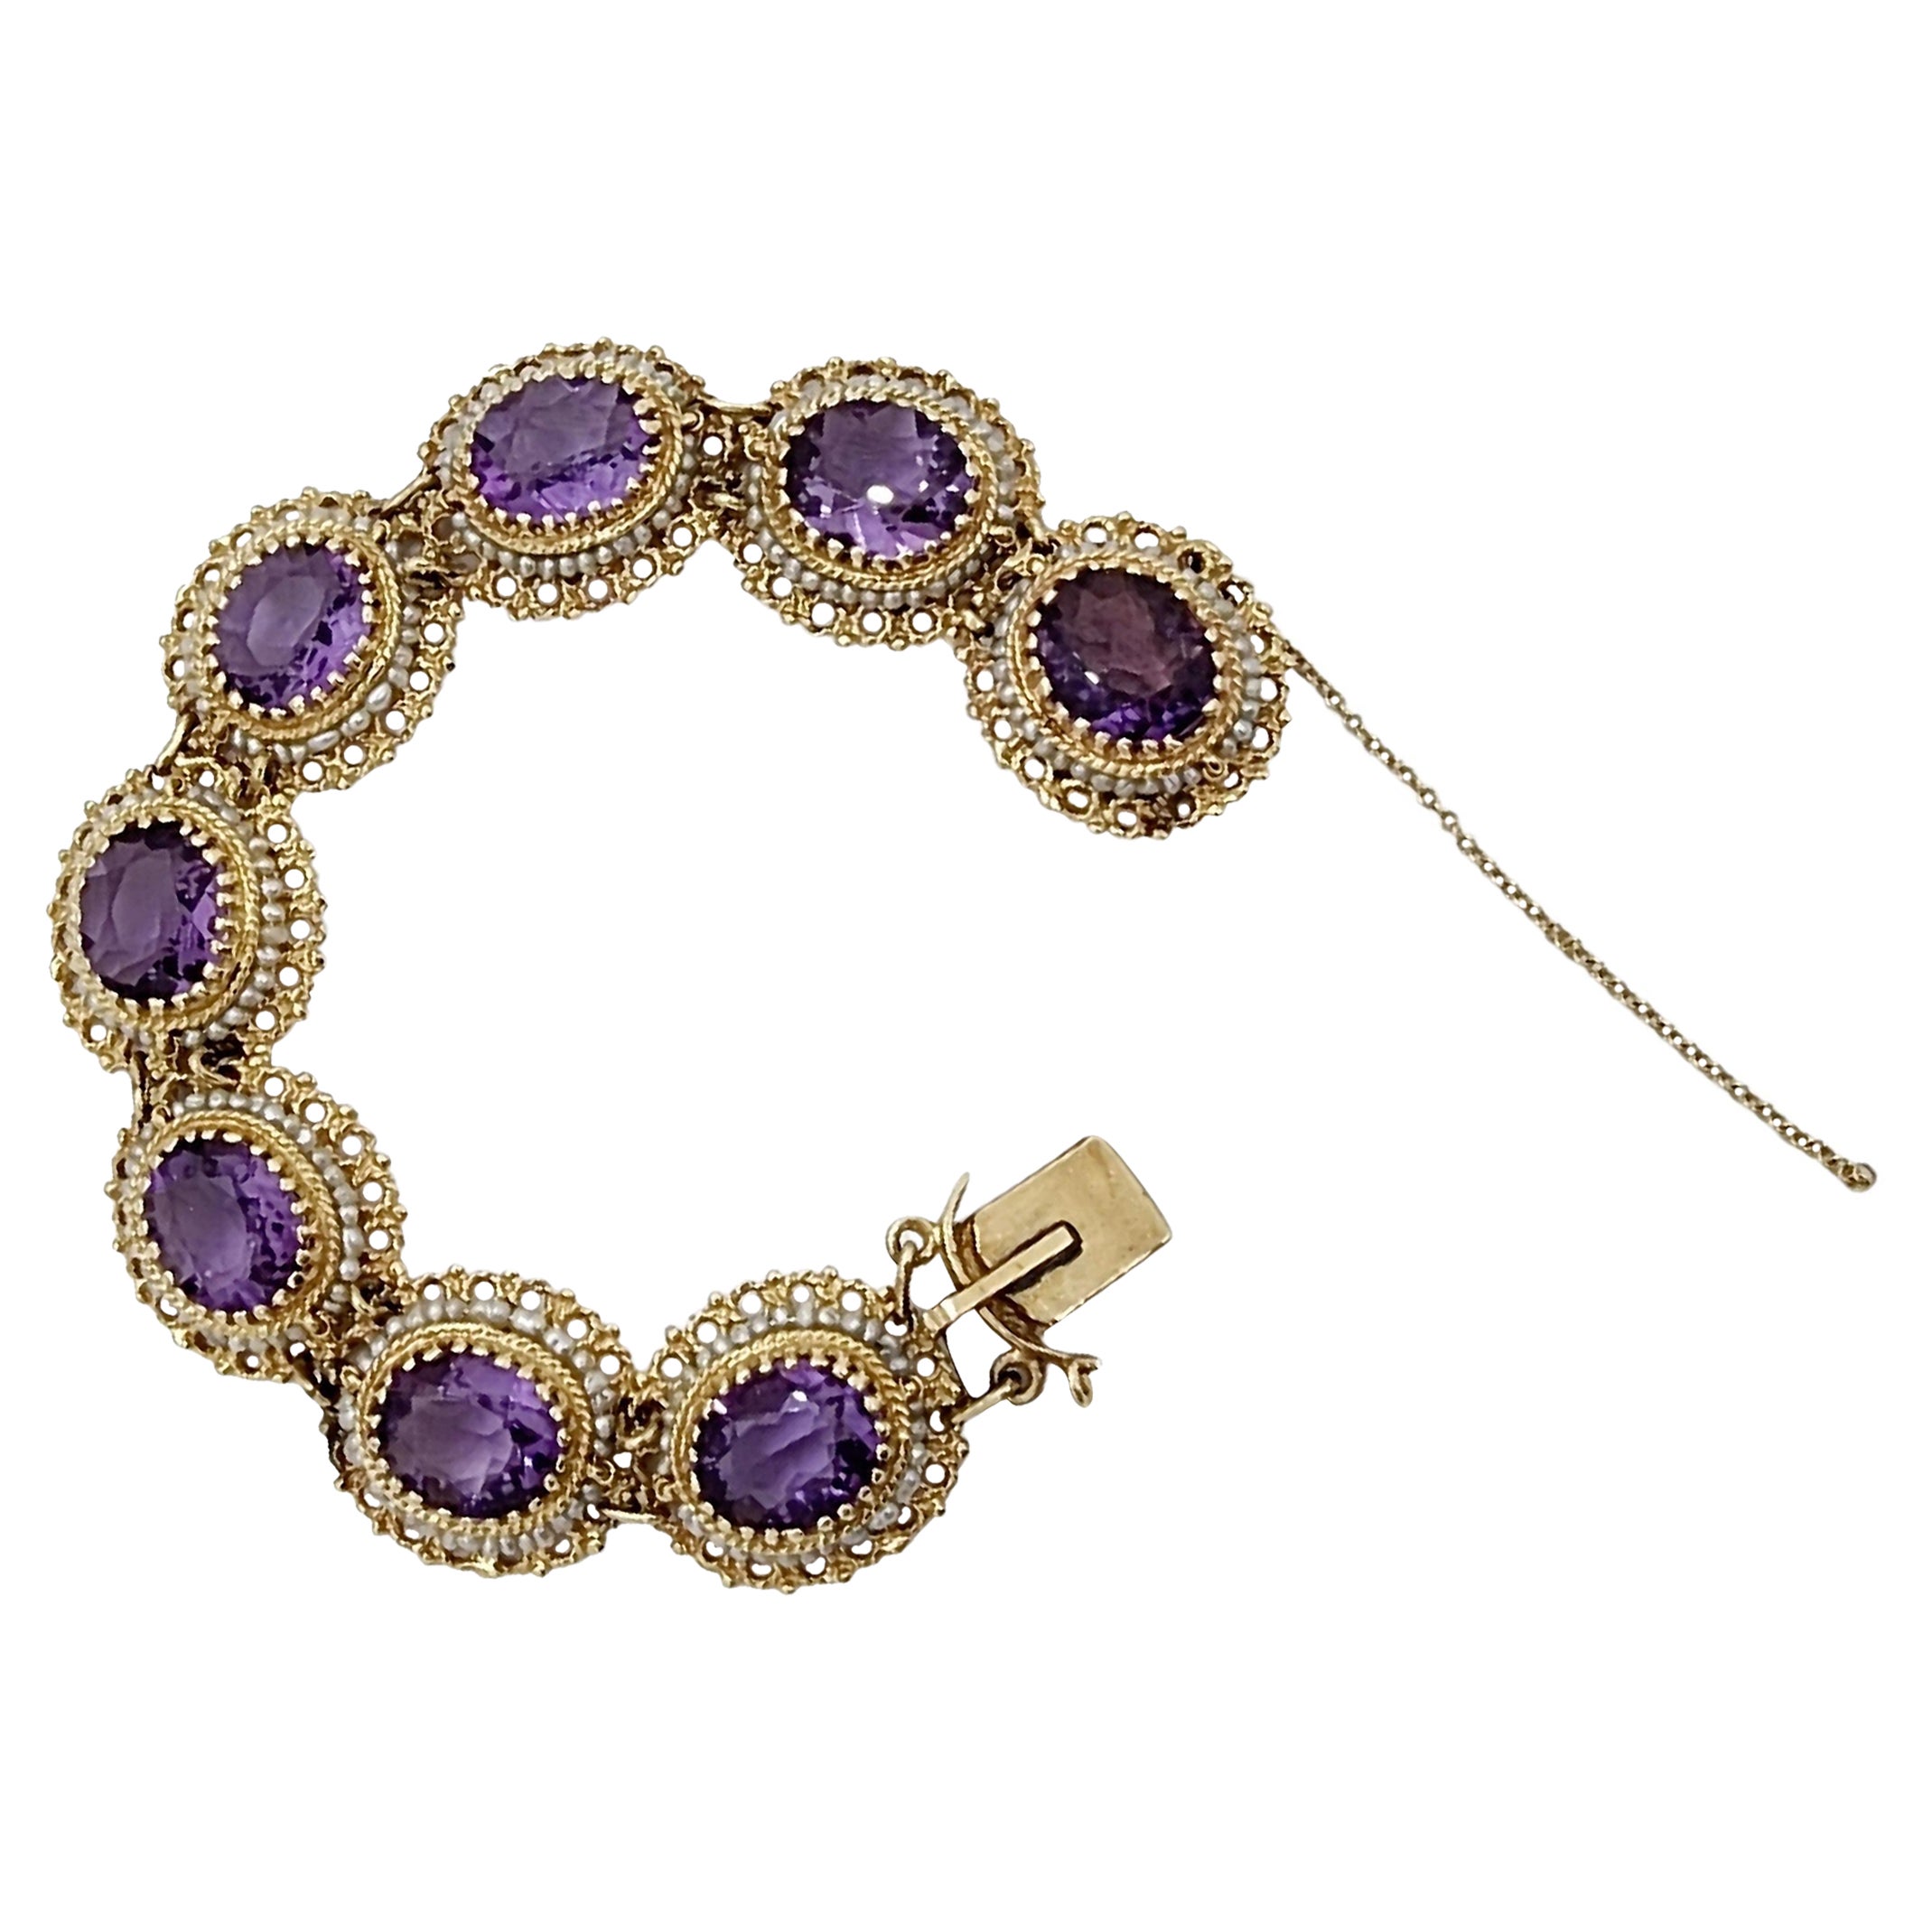 Amethyst and White Pearl Bracelet in 14k Yellow Gold